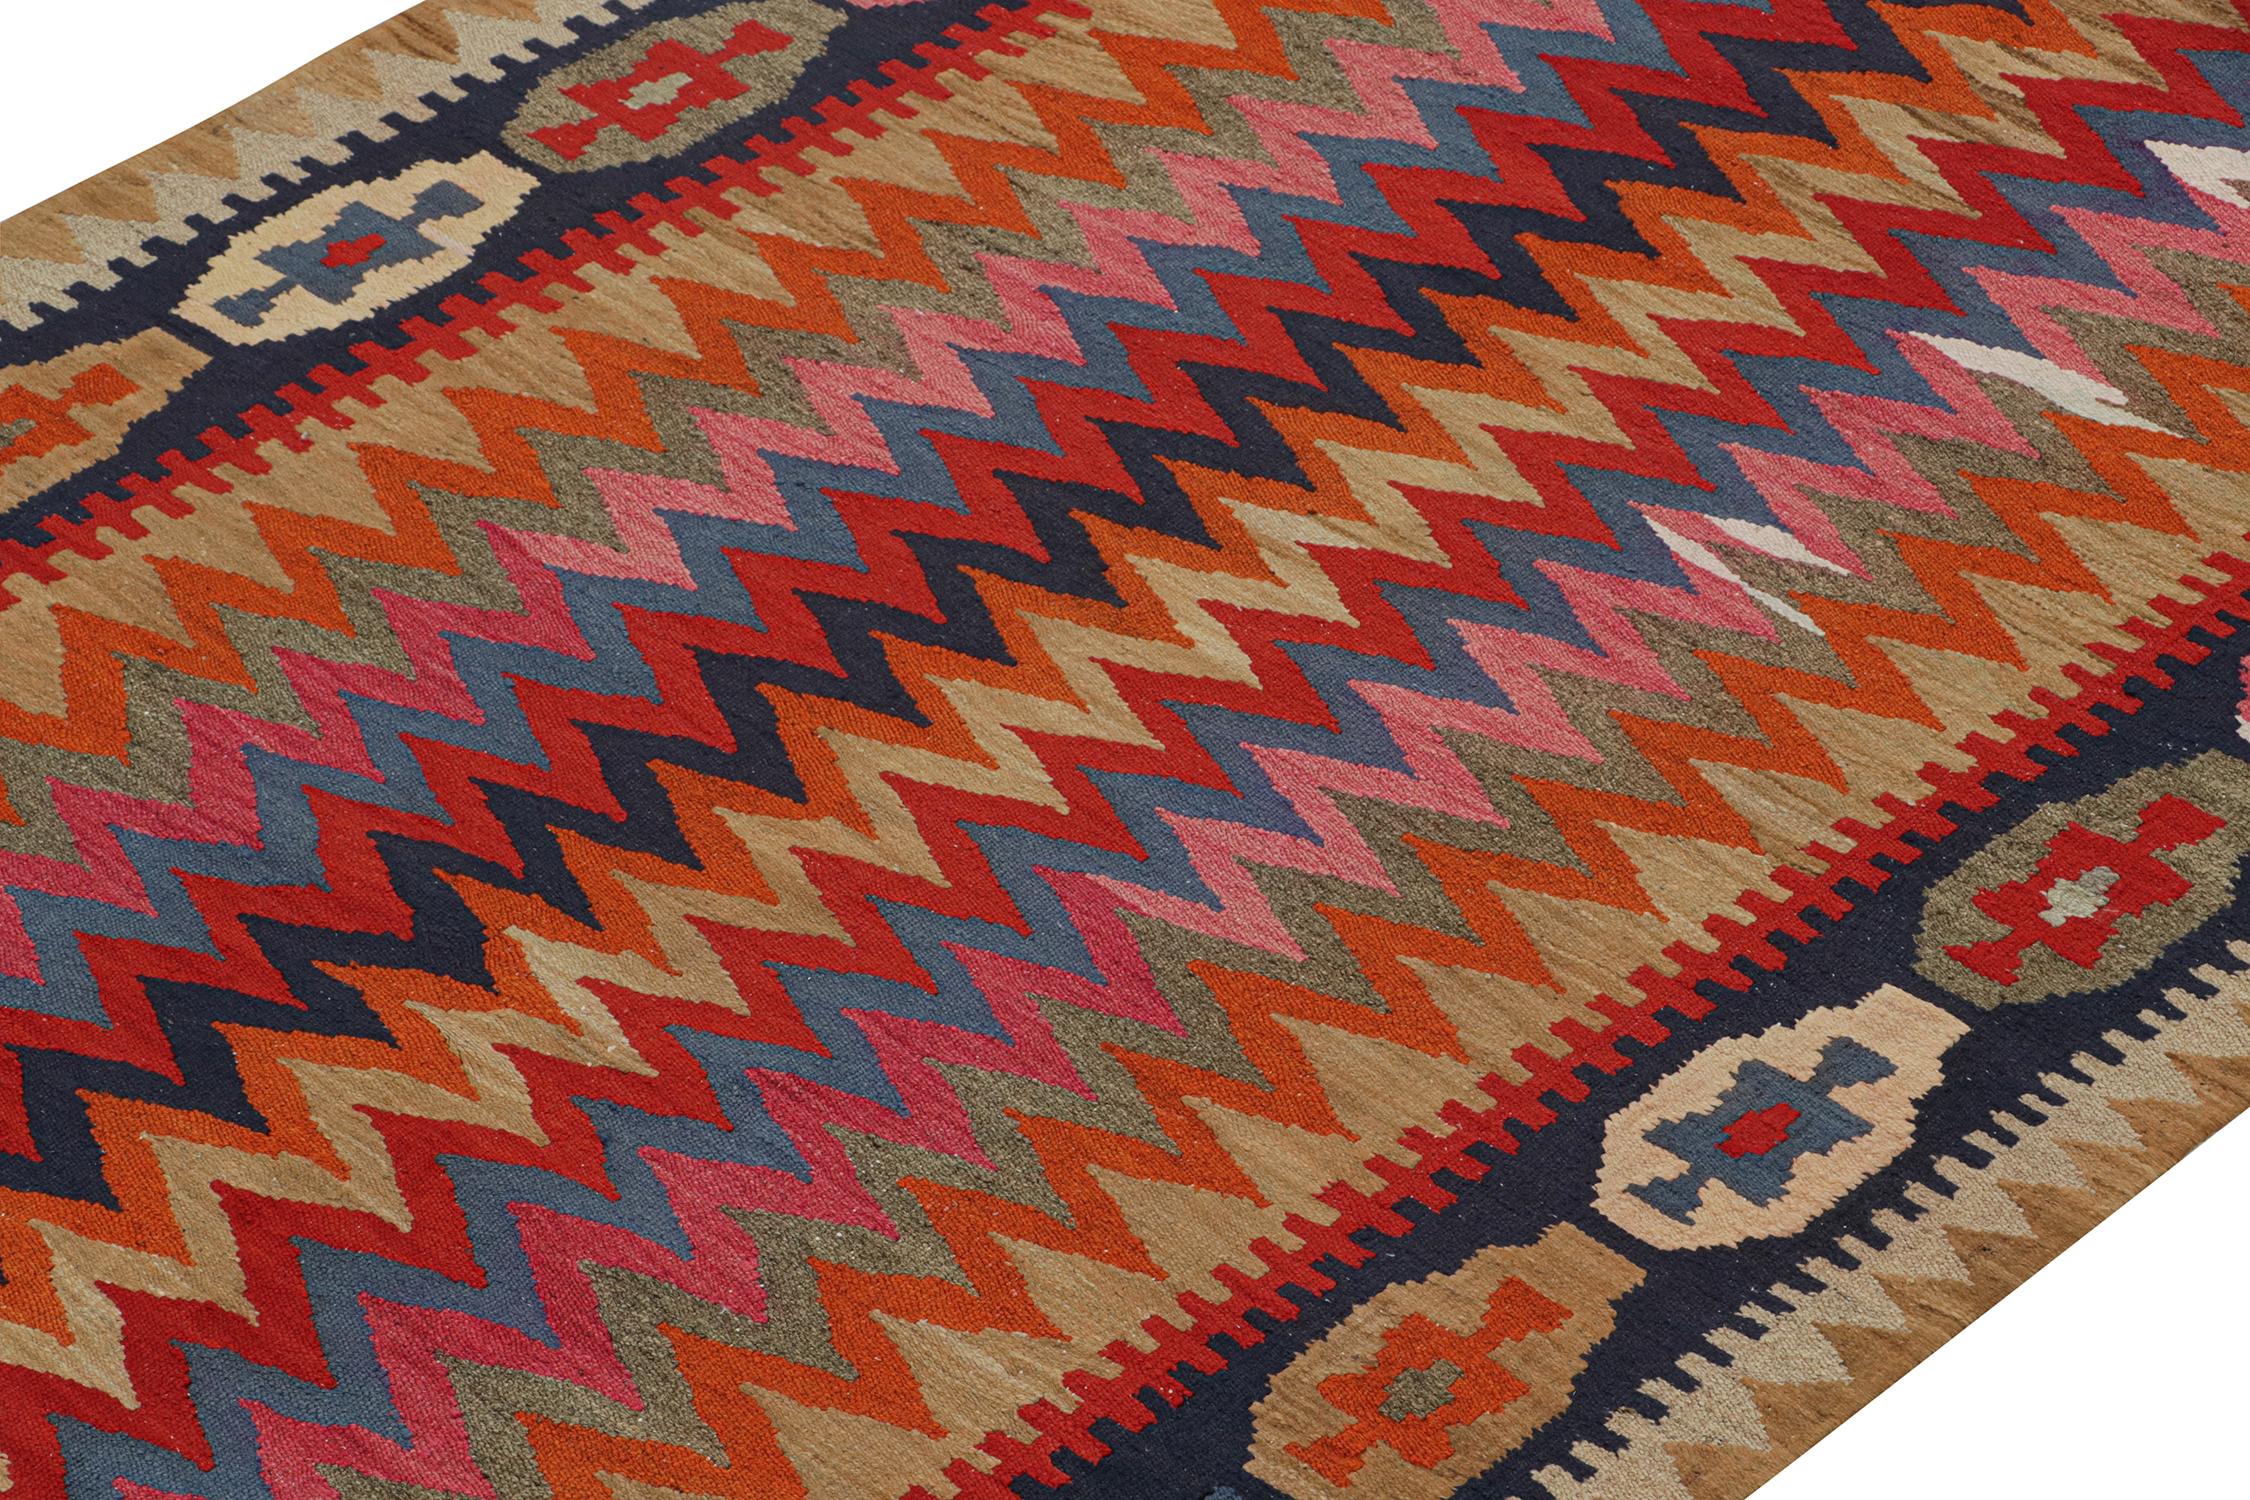 Vintage Shahsavan Persian Kilim with Vibrant Chevron Patterns by Rug & Kilim In Good Condition For Sale In Long Island City, NY